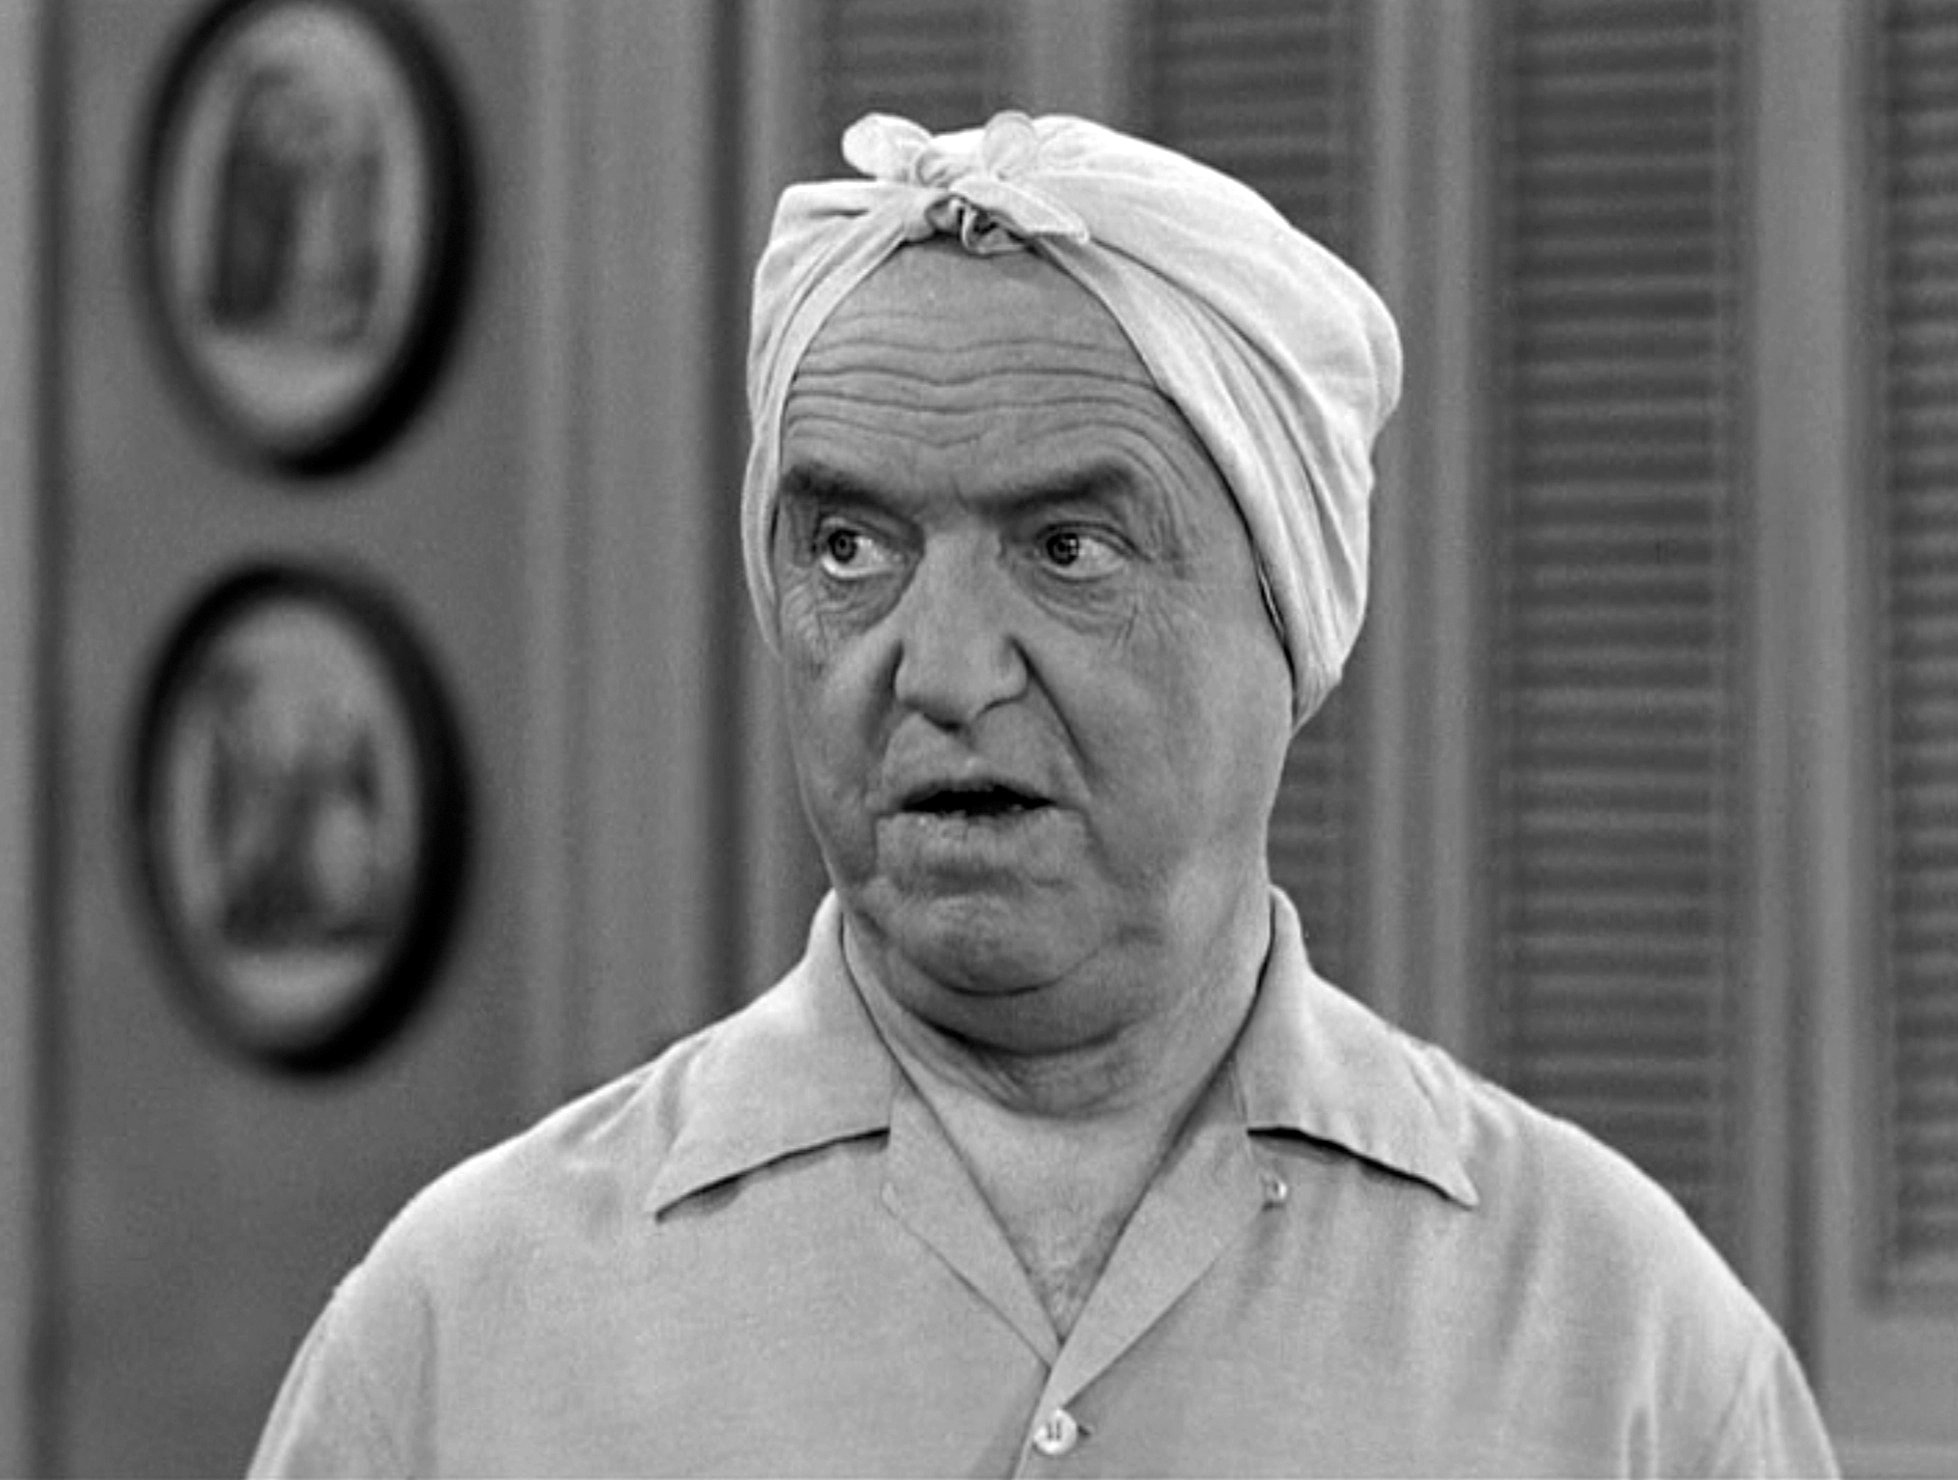 'I Love Lucy' actor William Frawley